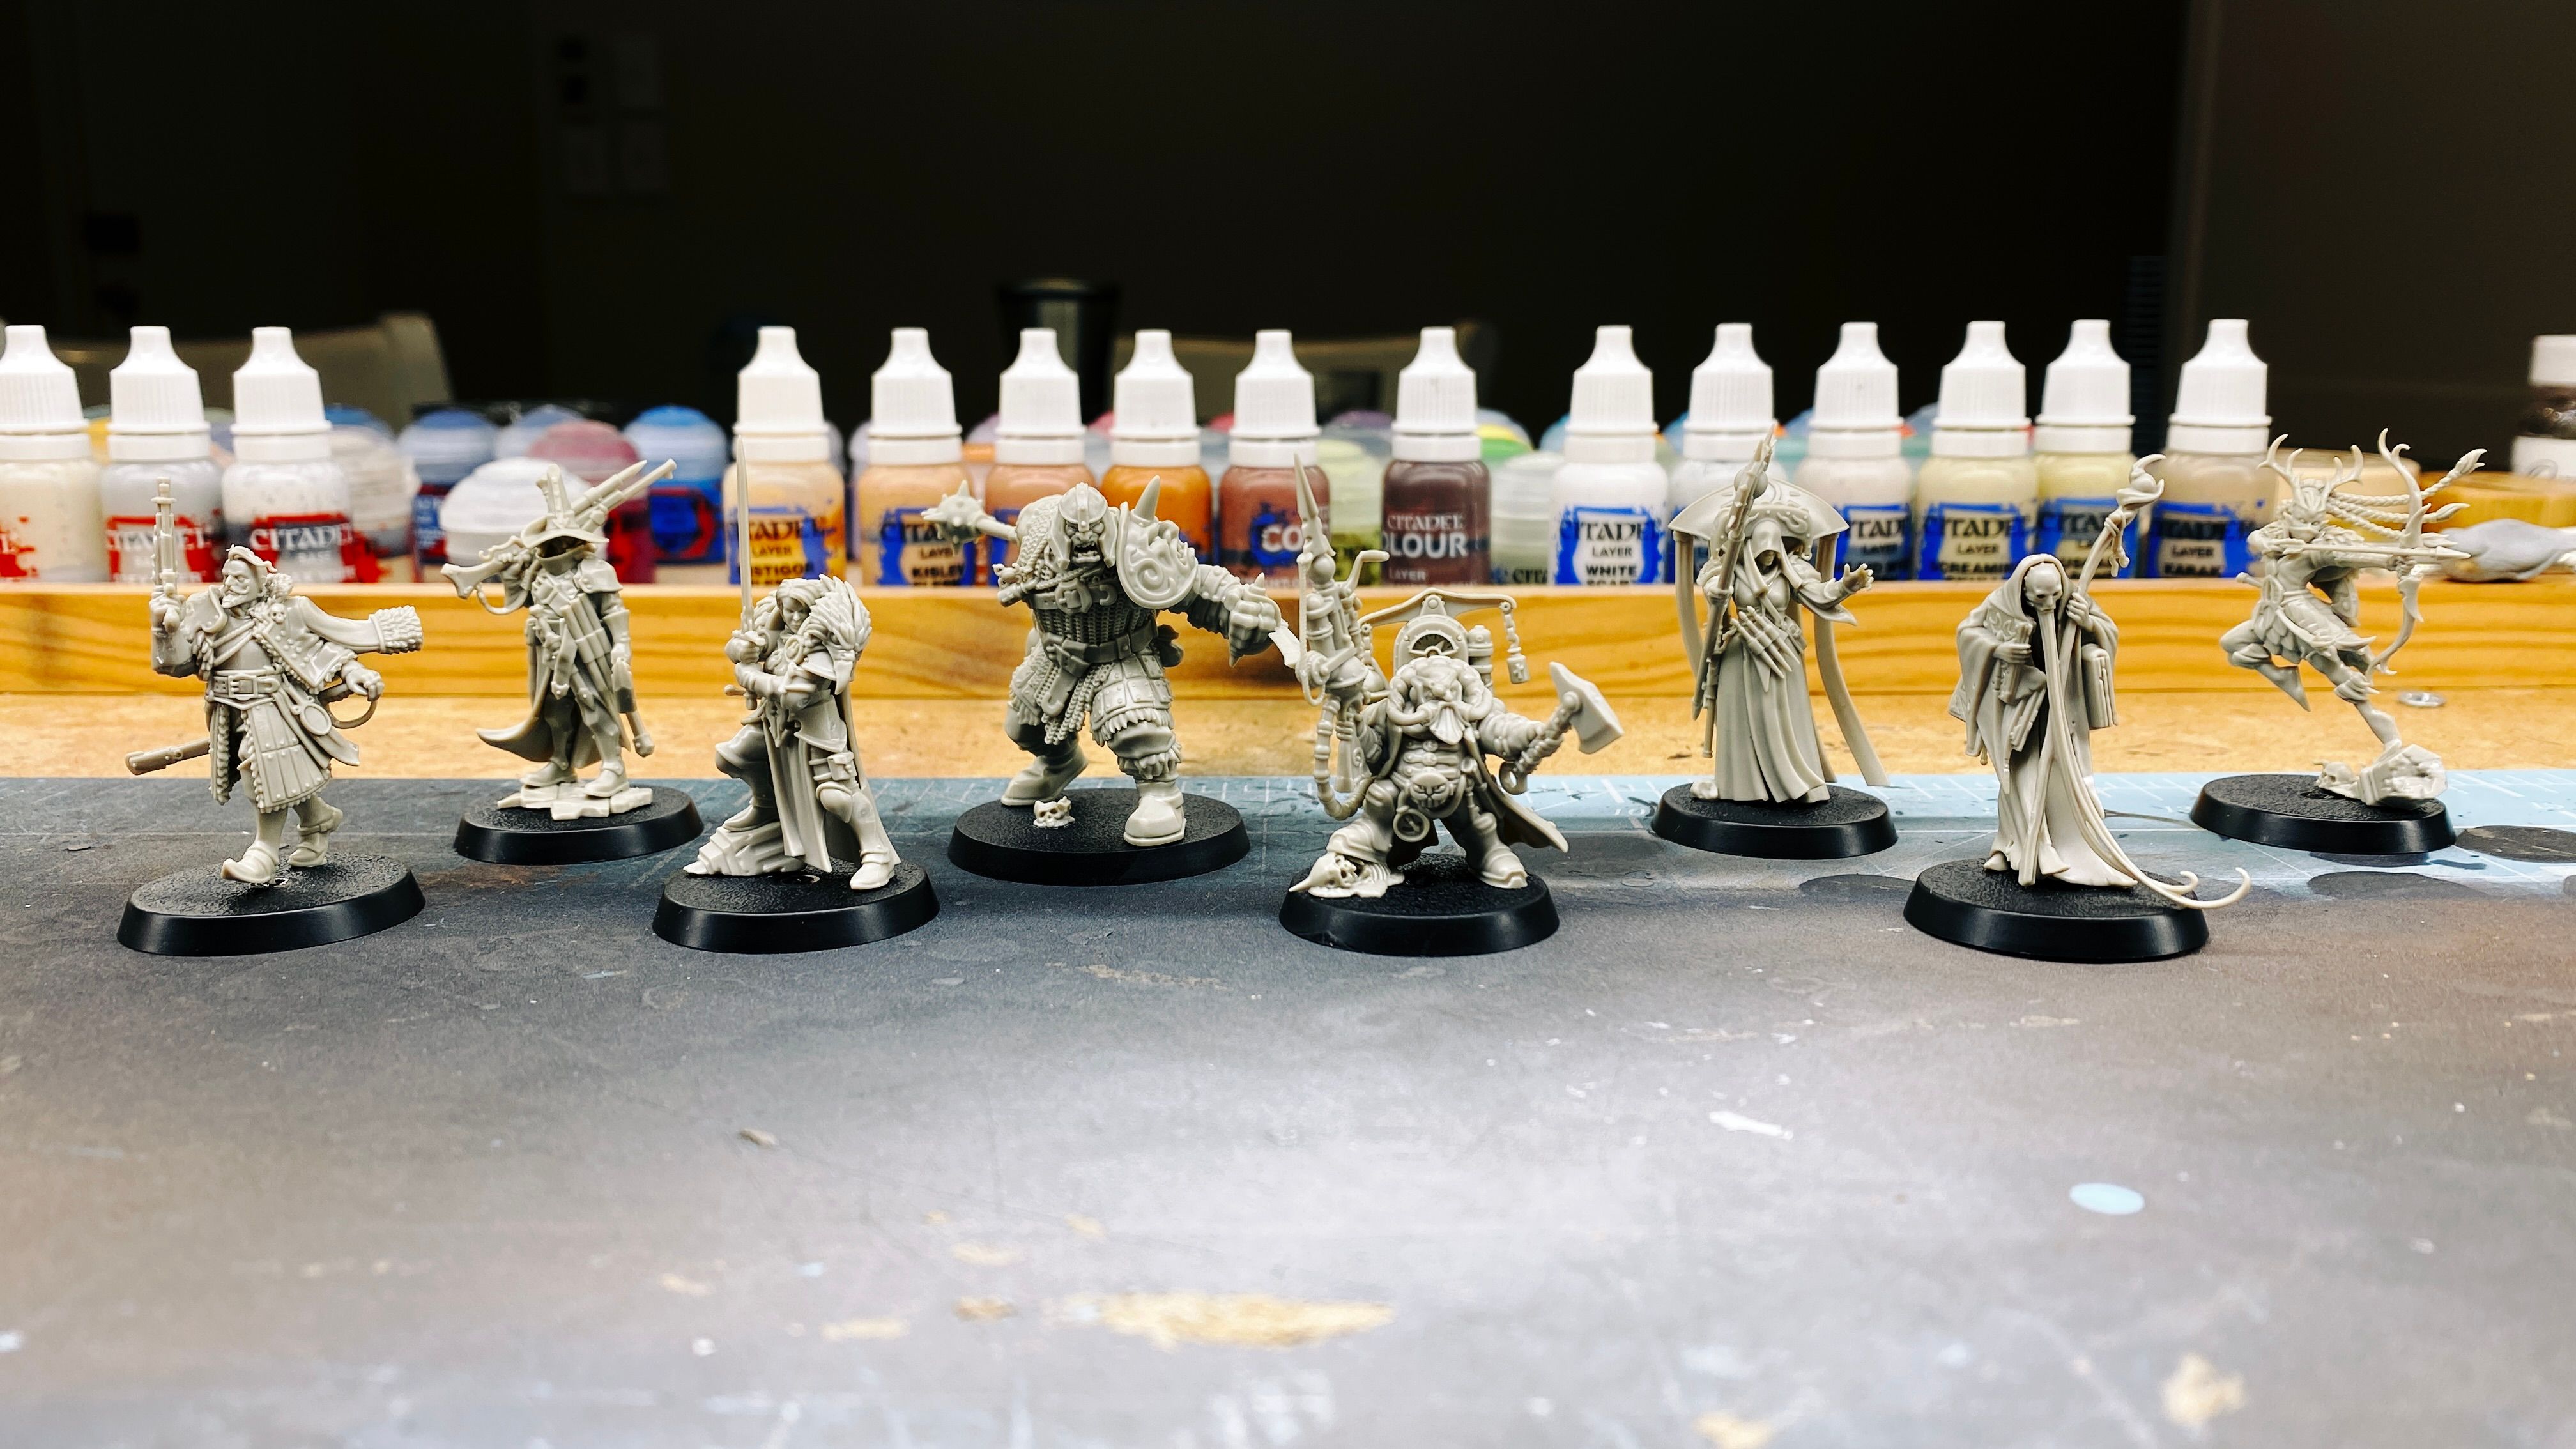 A photo of eight assembled but unpainted miniatures in bone white. We have:
- An aristocratic-looking fellow with a goatee and holding a old timey-pistol and a sword, mid-swagger.
- A vampire hunter with the standard pointy hat and cool cloak holding a shotgun-looking thing, and with many wooden stakes about his person.
- A heavily-armoured warrior woman holding a large sword in front of her, with the head of a gryphon draped over her shoulders.
- A HUGE ogre that's a good couple of heads taller than anyone else, with a massive mace that he's about to swing.
- A dwarf with steampunk-looking armour holding an axe and a steampunk-looking gun.
- A priest in long robes with a hood on and a big elaborate, uh... thing on her back that a bunch of strips of fabric are hanging from. She holding a staff and has her hand out like she's about to cast a spell.
- A wizened wizard who's hunched over in a big robe and has a like skull mask on and a MASSIVE long thing beard, he's holding a staff and clutching a very large tome under the other arm.
- And lastly, a elf with a bow who's mid-leap and also mid-shot, with her braids out behind her. She's got a bandana over her mouth and nose and her headdress is antlers.